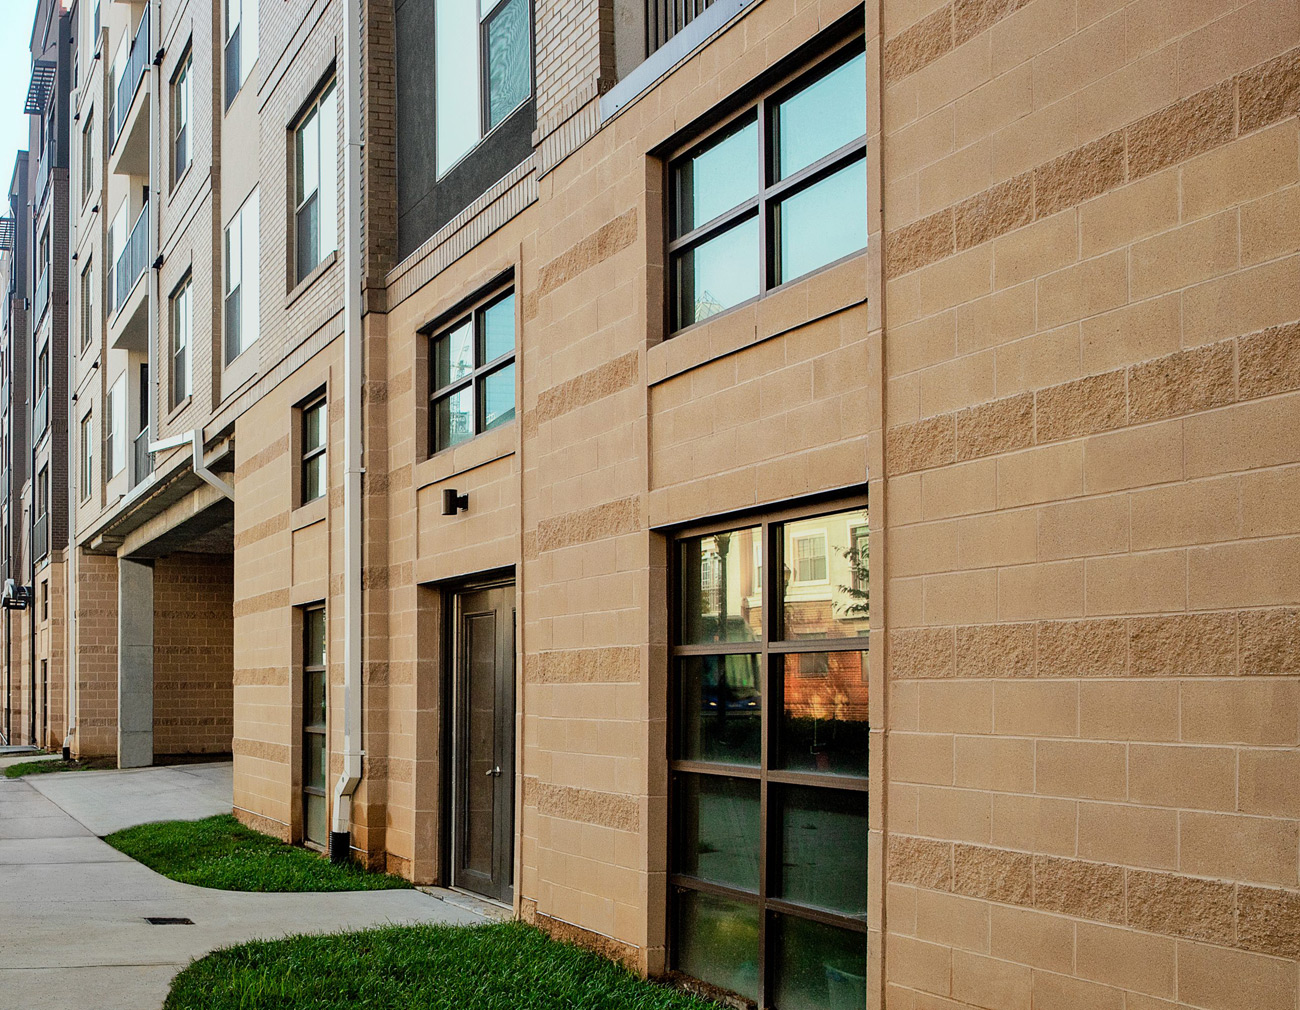 1100 South Apartments in Charlotte, NC featuring Prestige Masonry Architectural Block - Smooth Face in Shoreline Sand